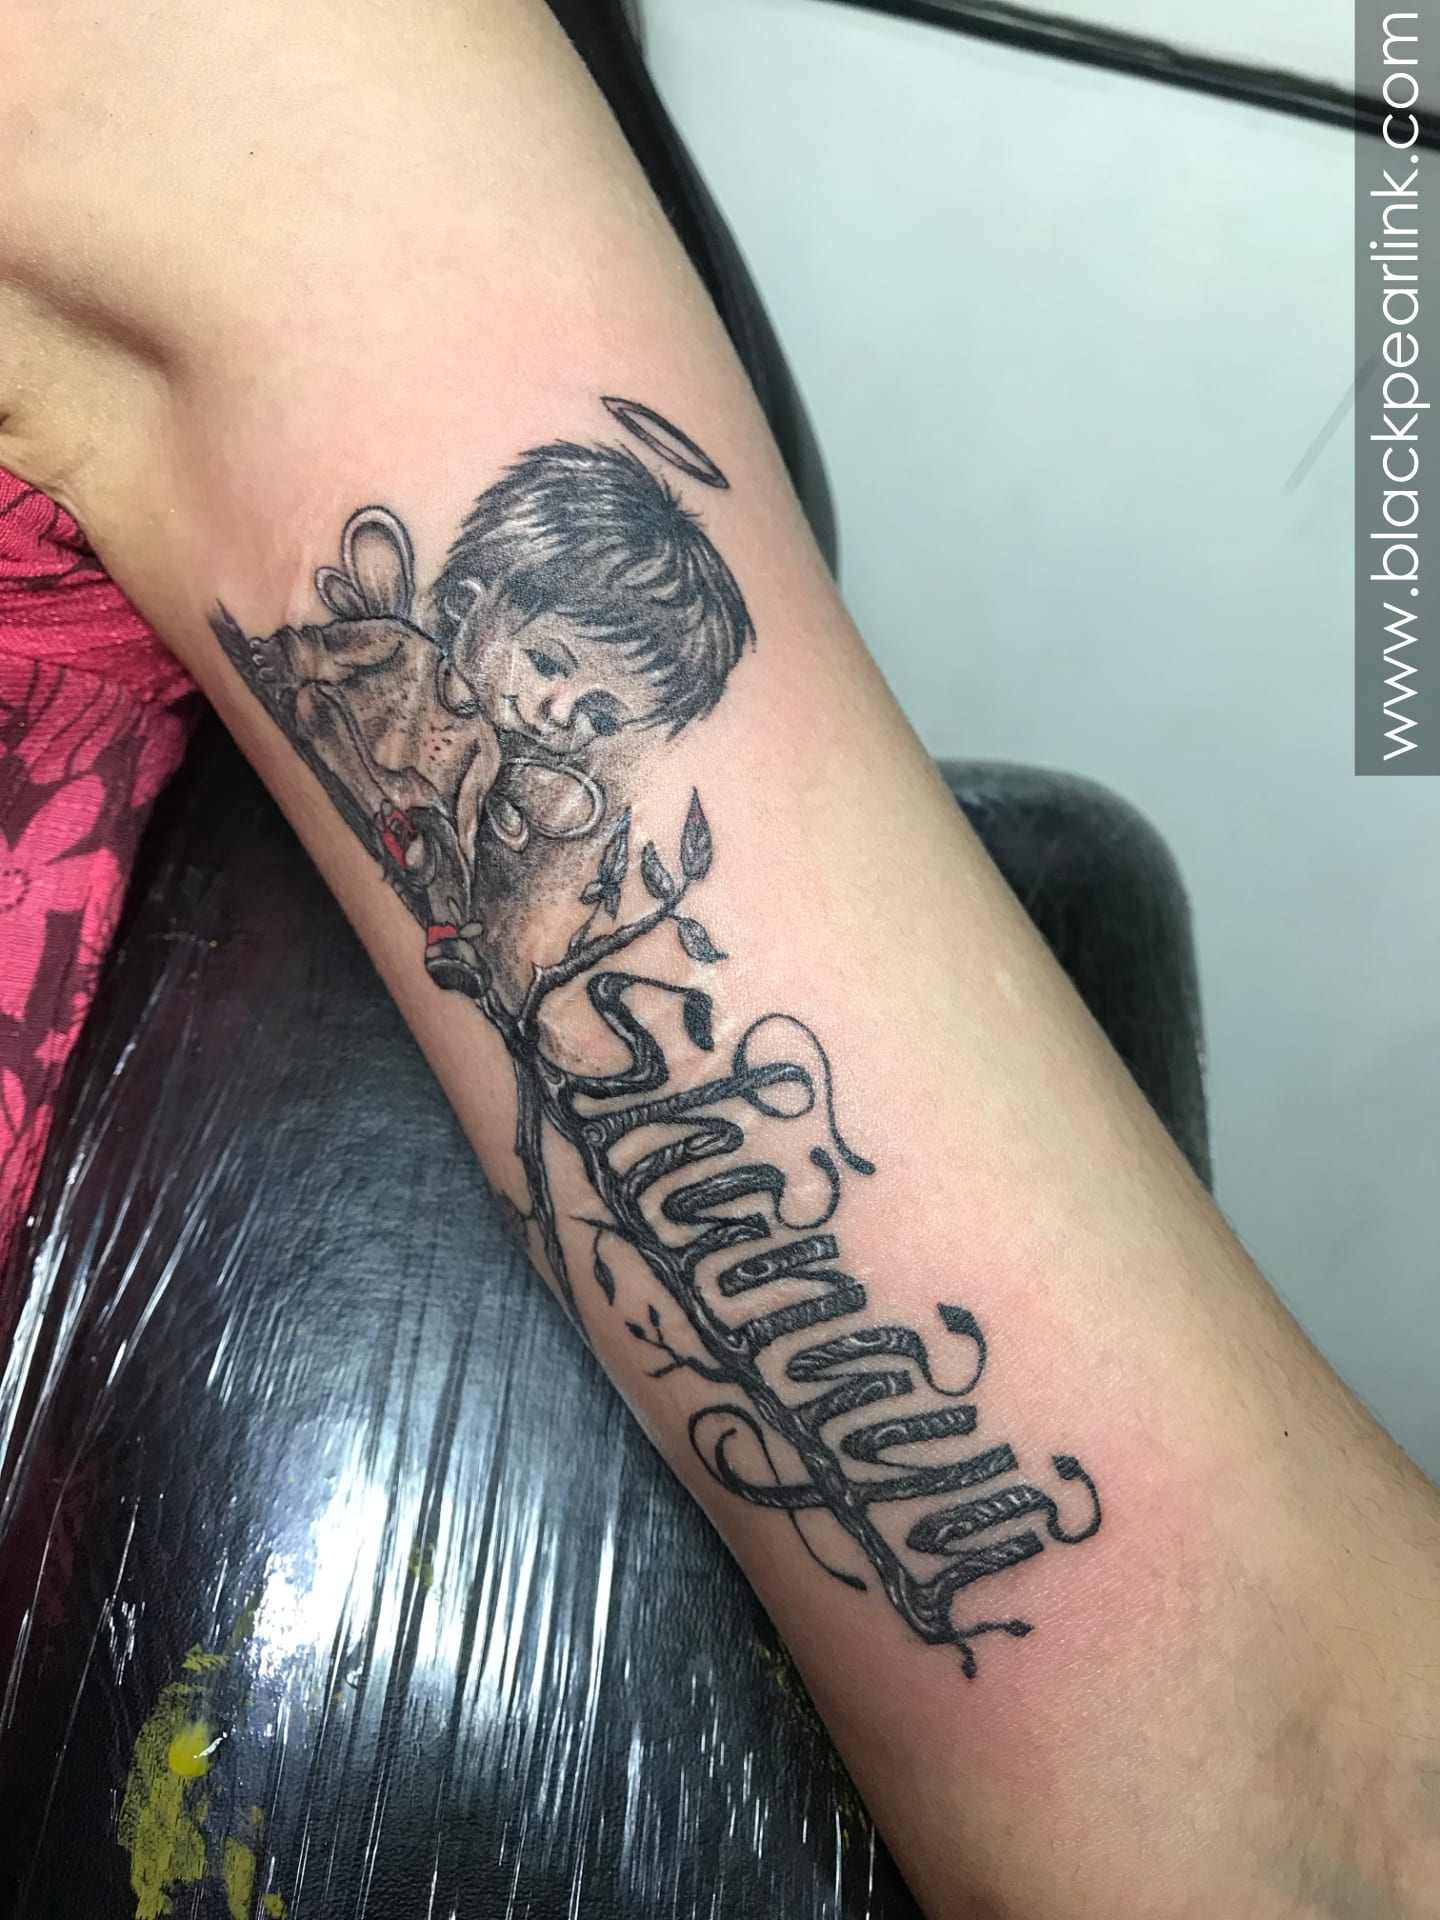 https://www.blackpearlink.com/wp-content/uploads/2020/08/Scar-Coverup-with-Baby-Tattoo-1.jpg